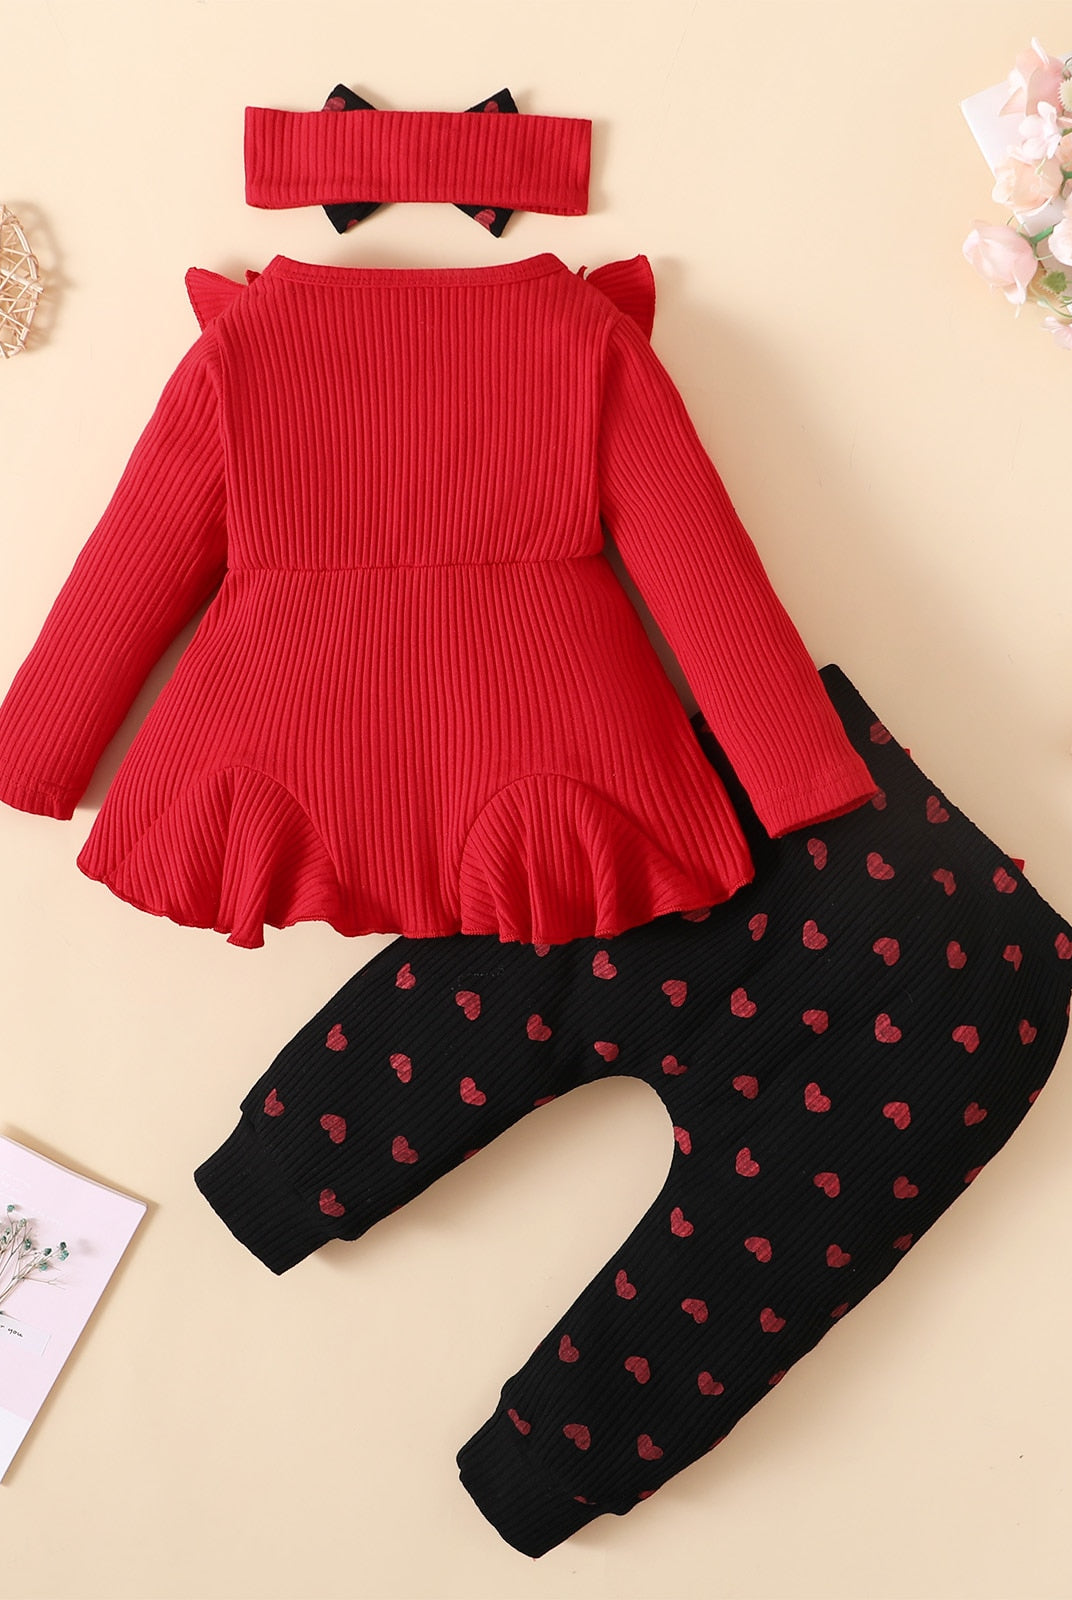 3-Piece Bowknot Girl Outfit in Red from the back.